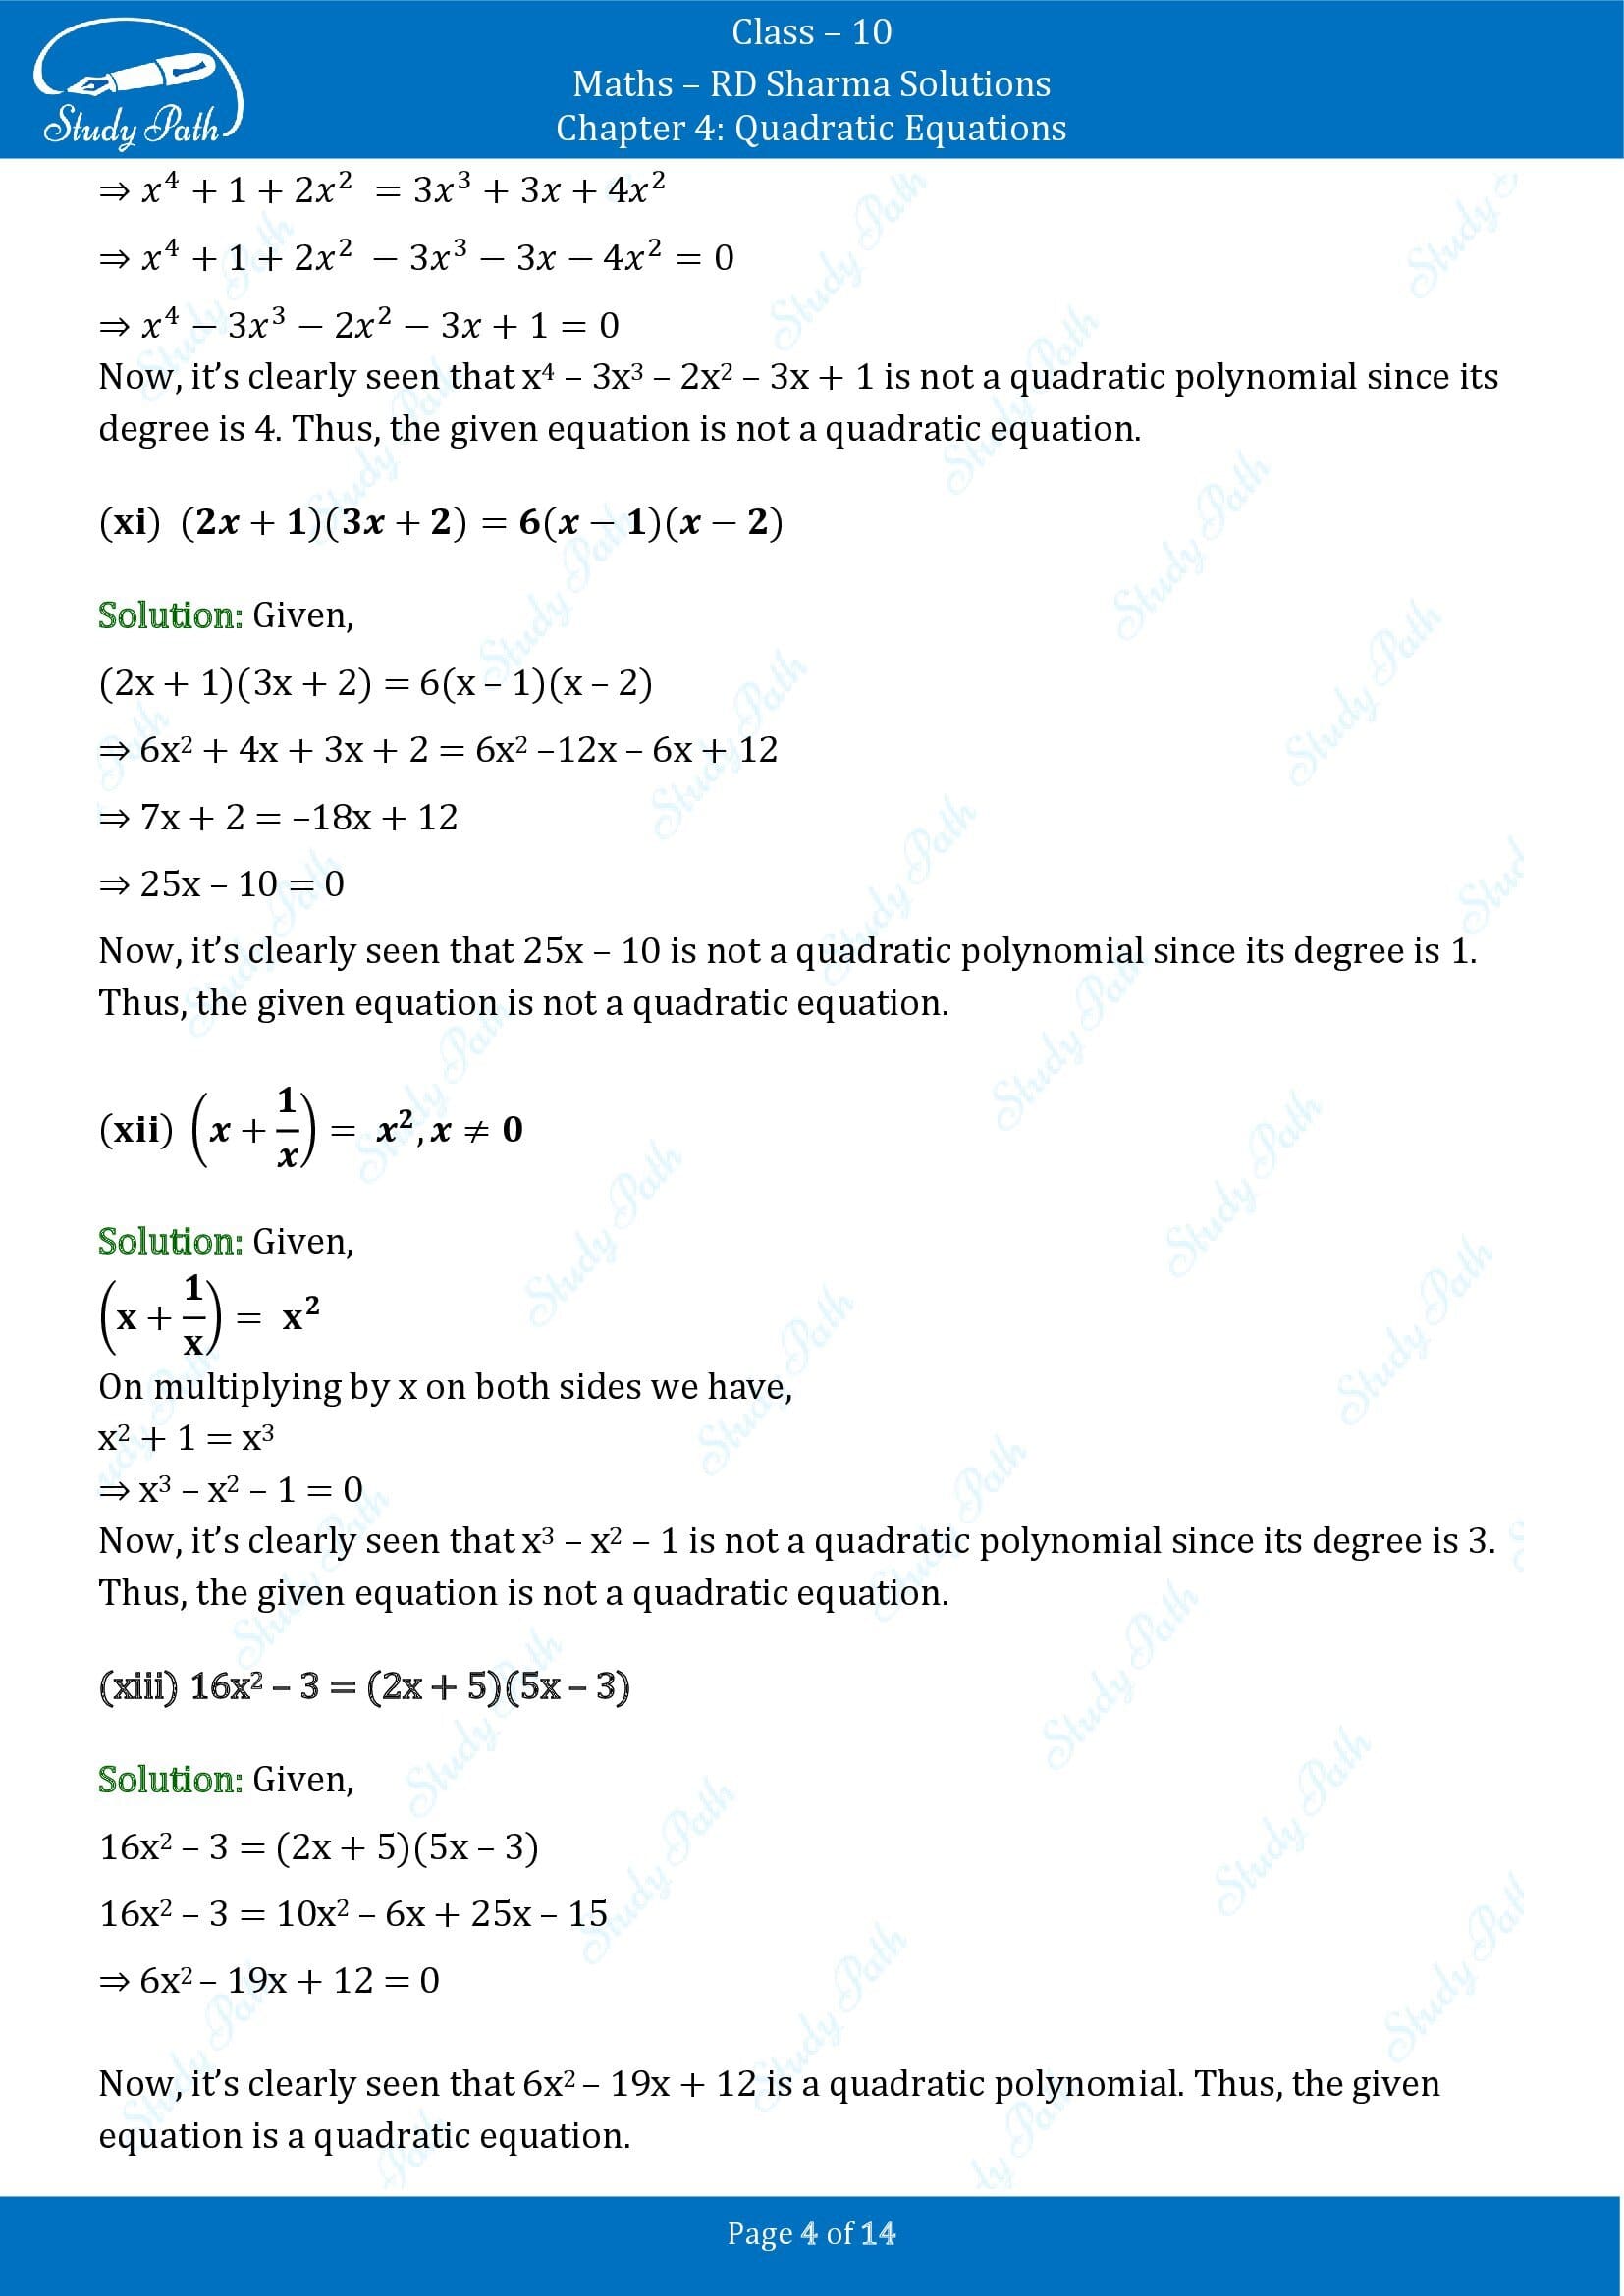 RD Sharma Solutions Class 10 Chapter 4 Quadratic Equations Exercise 4.1 00004